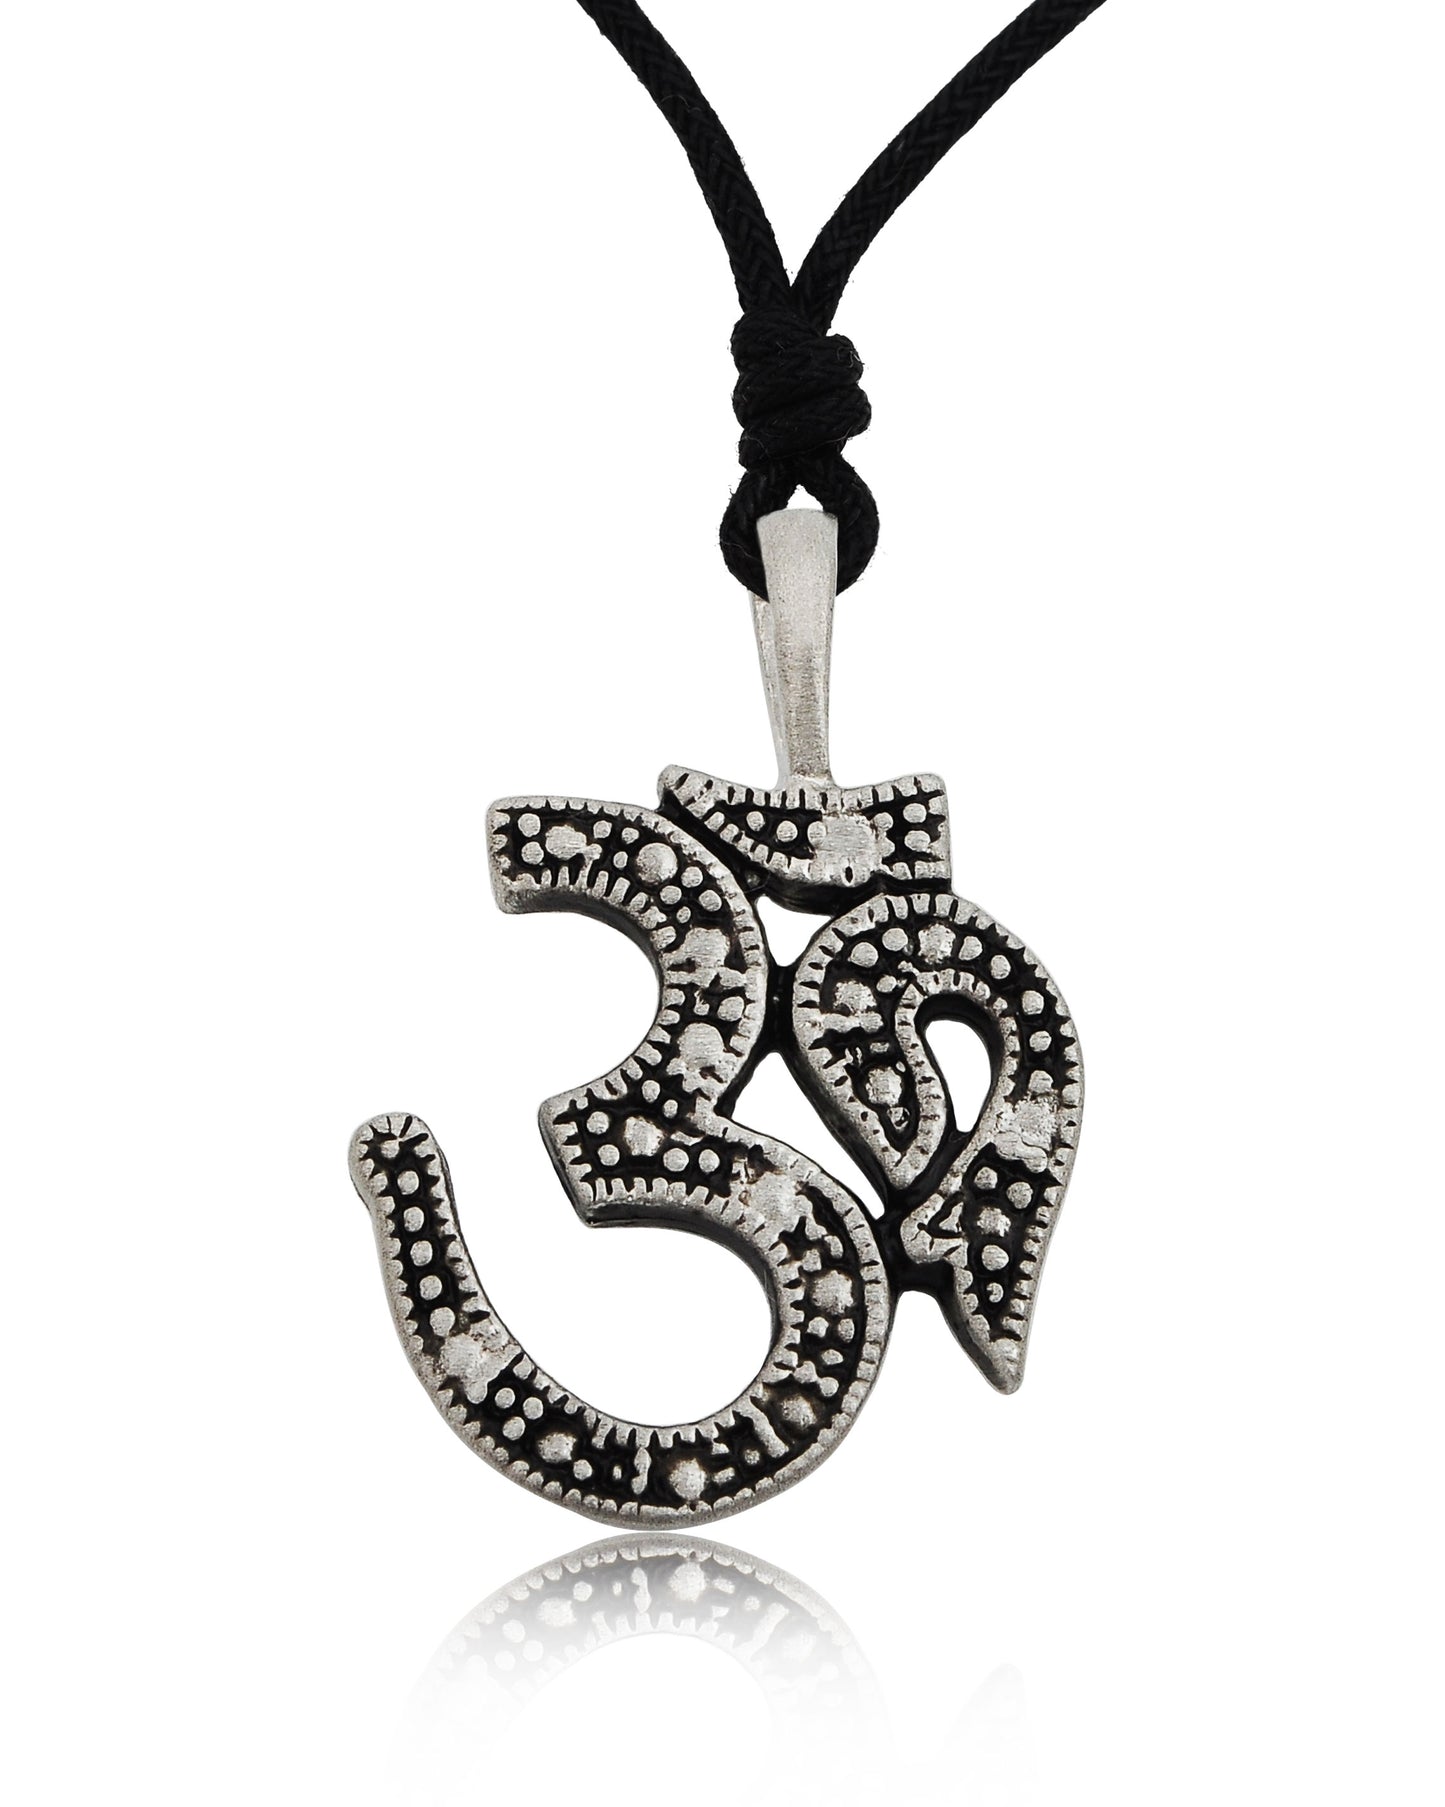 Ohm Aum Om Handcrafted Silver Pewter Brass Charm Necklace Pendant Jewelry